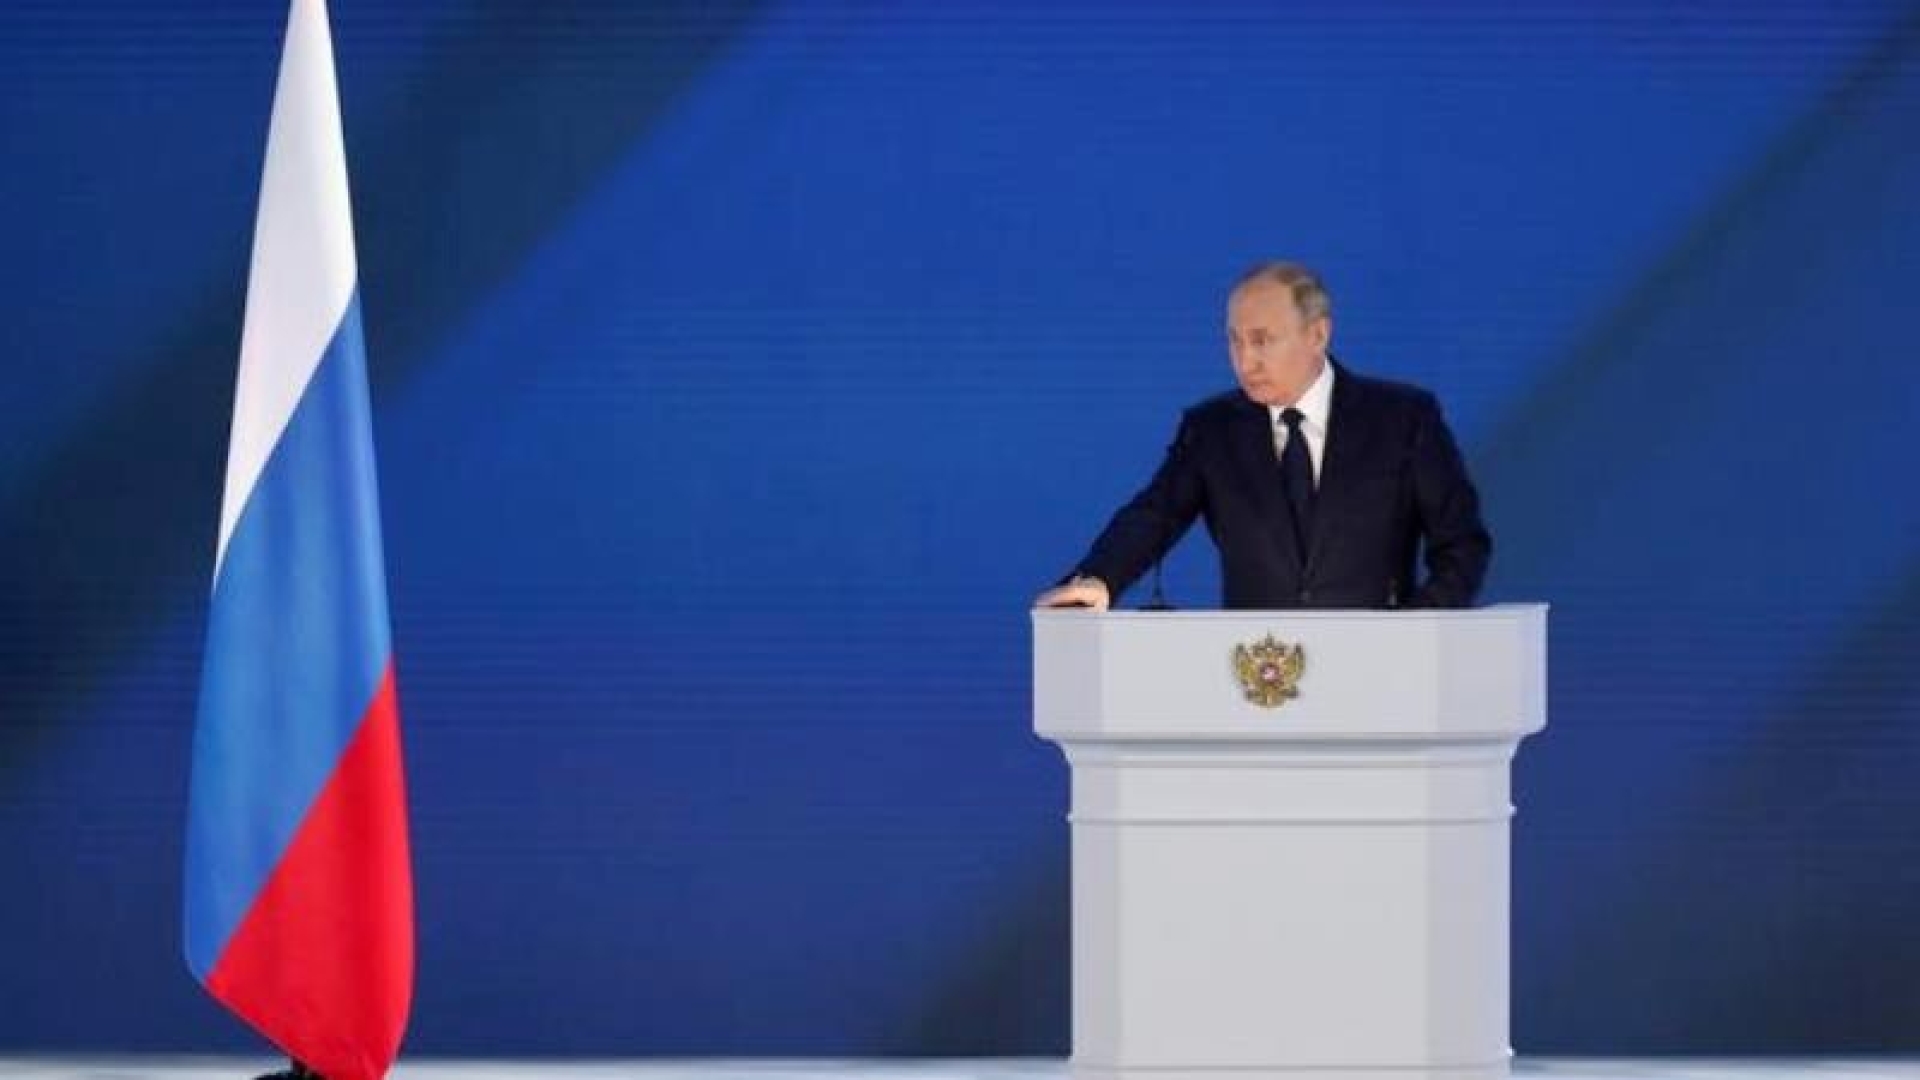 Vladimir Putin and the "red lines for Sherkhan"